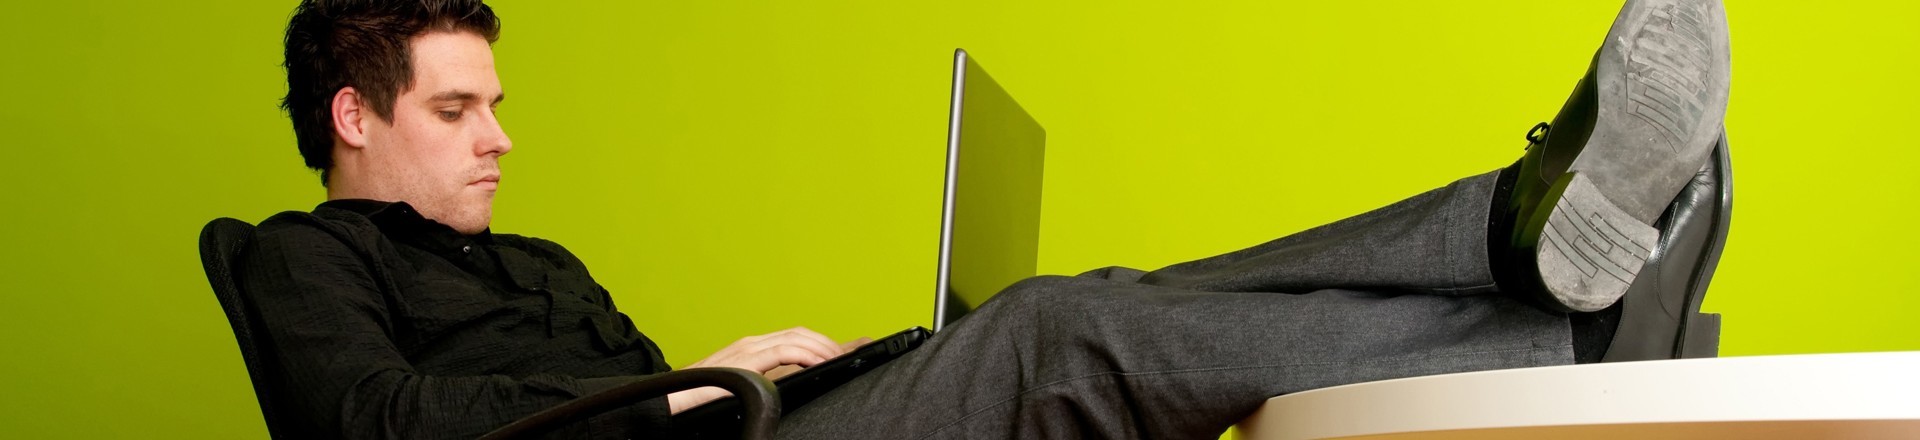 why men should keep laptops off their laps